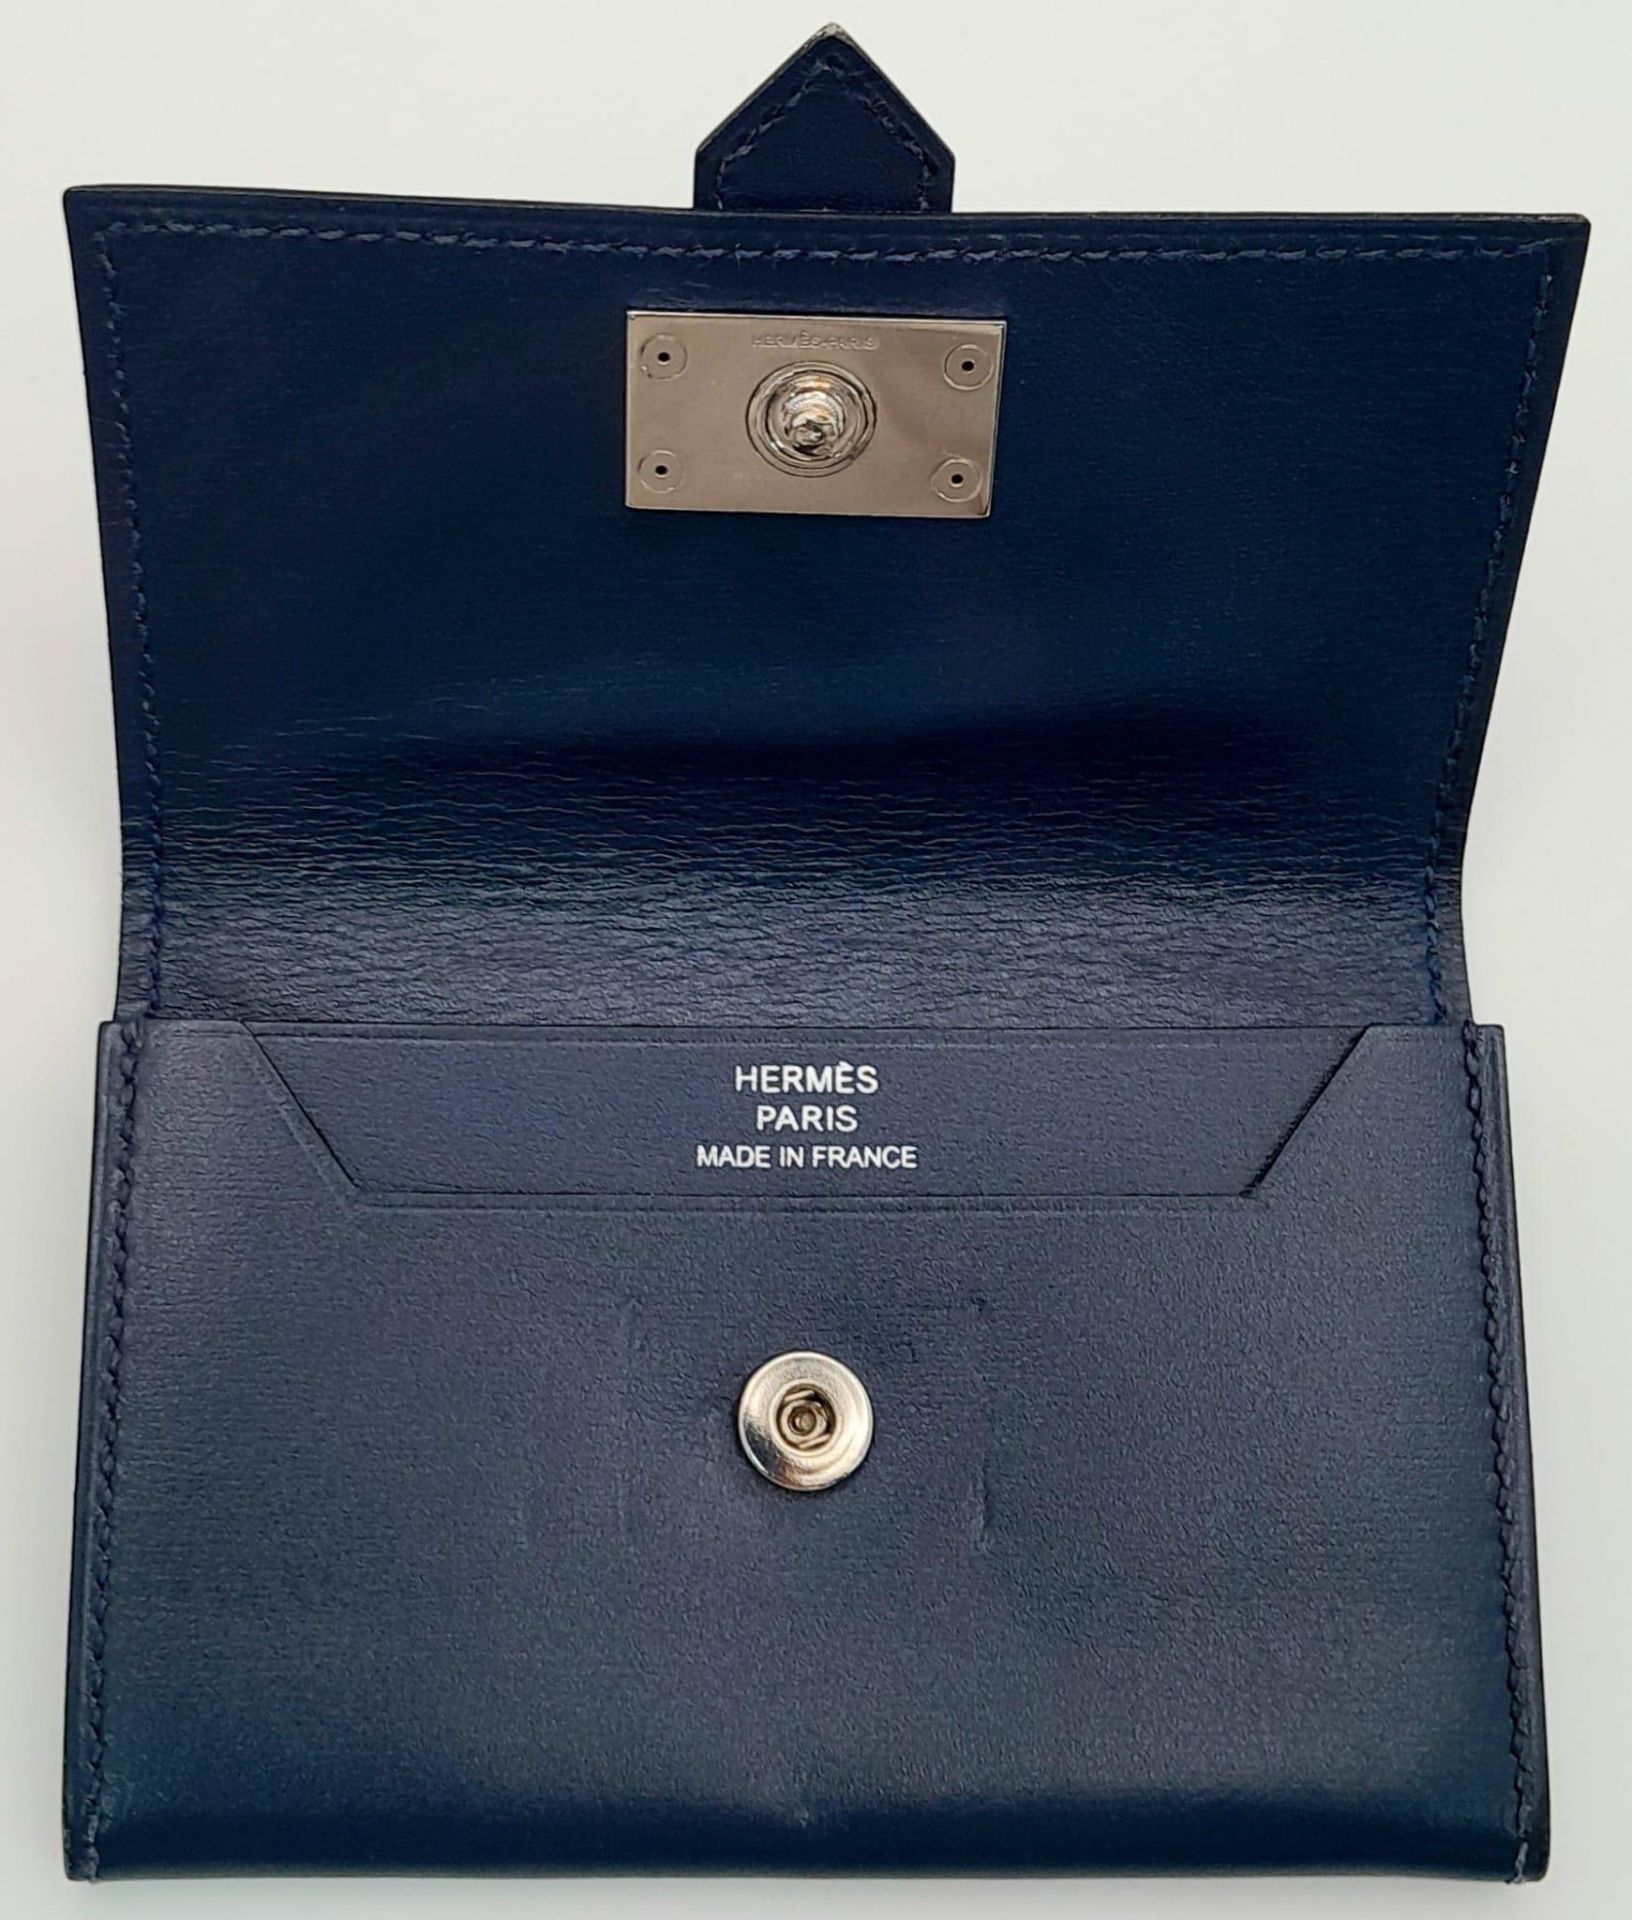 A Small Blue Leather Hermes Ladies Wallet. Flap design with Letter H branding. In good condition but - Image 5 of 7